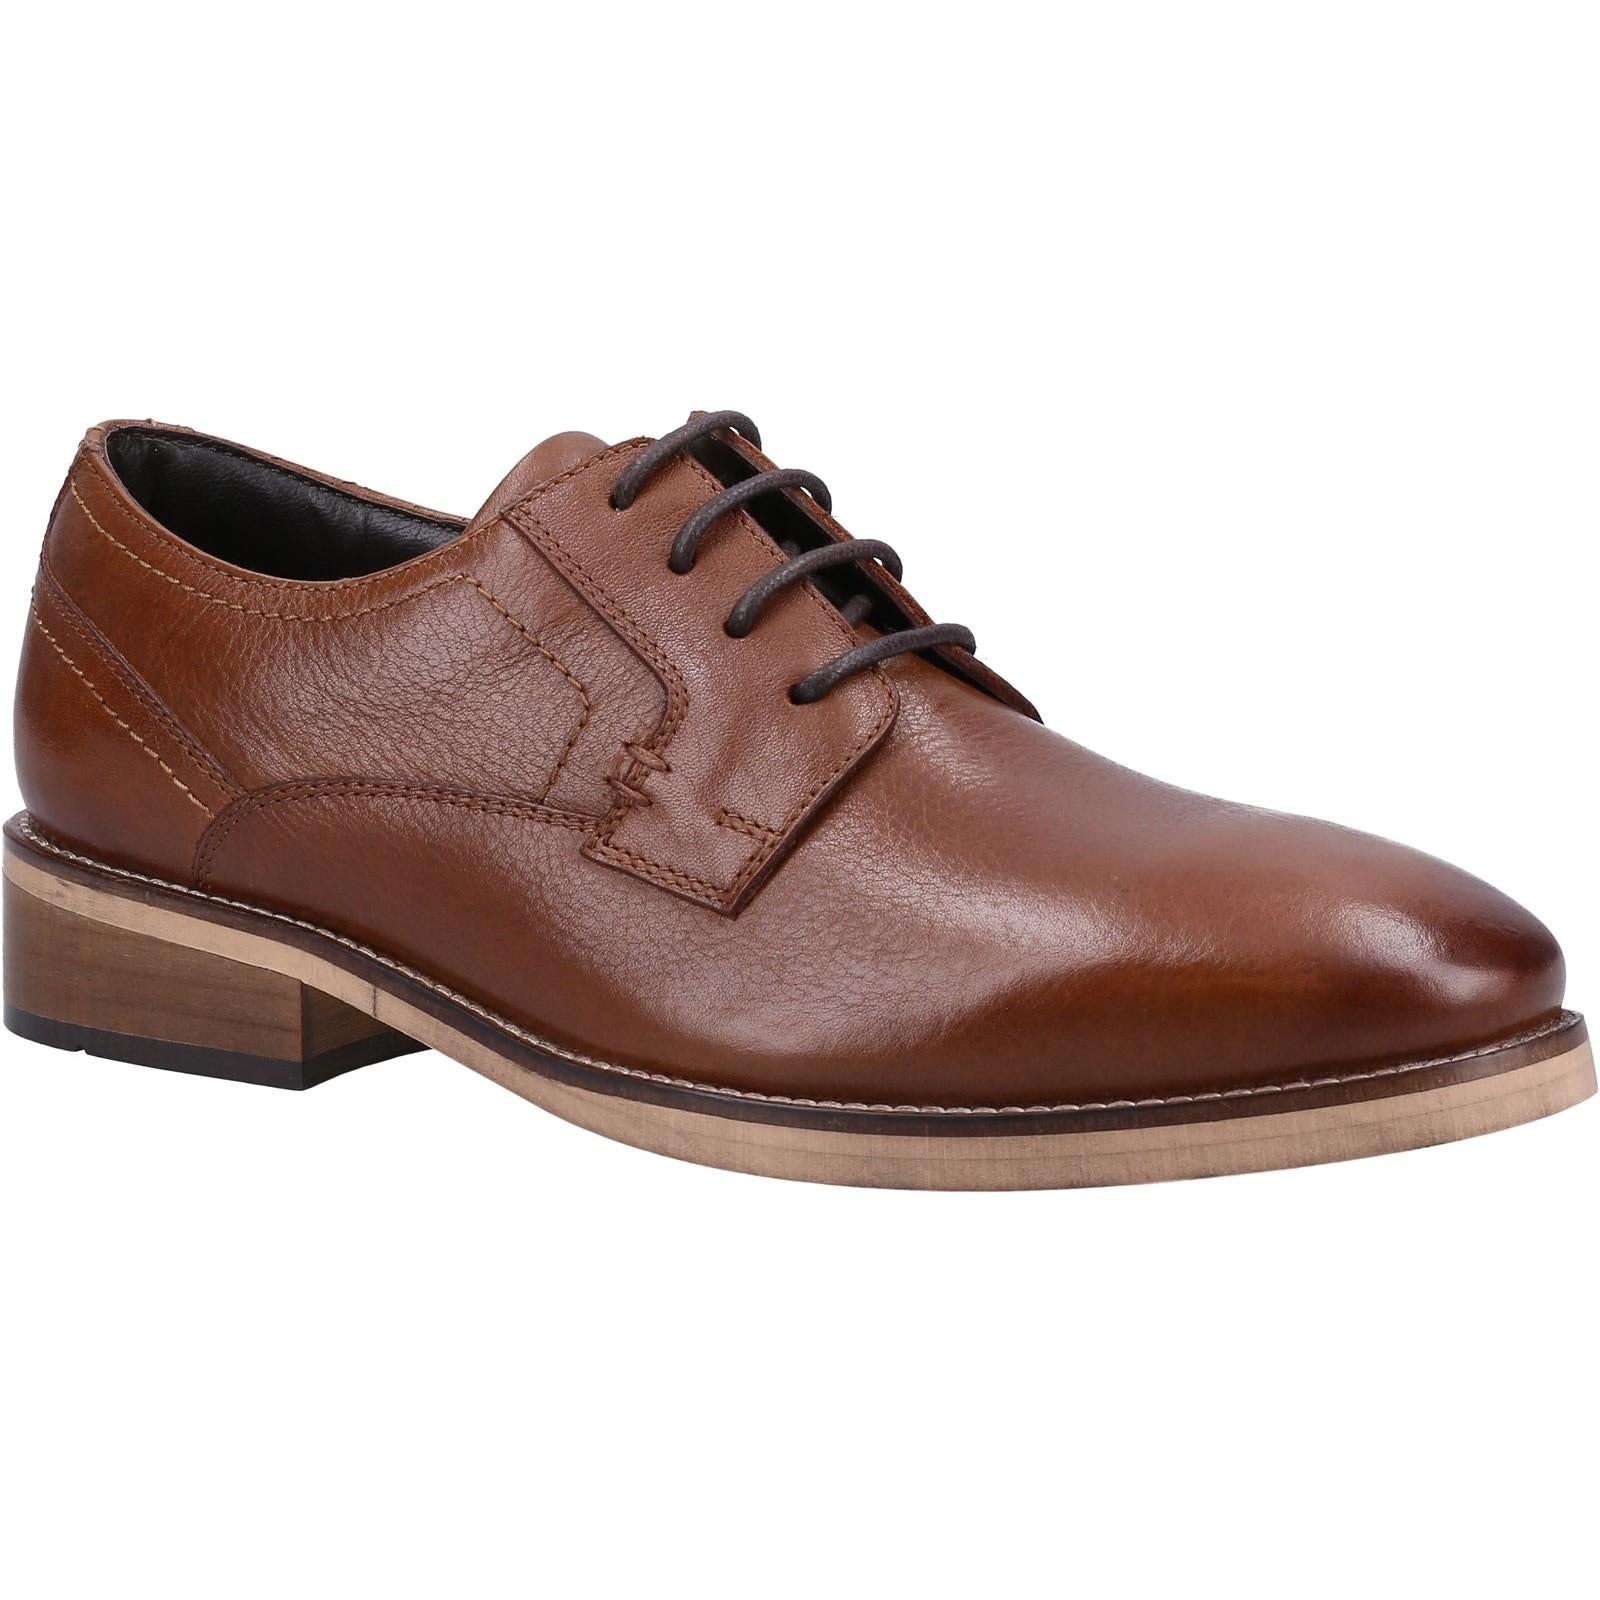 Cotswold Edge tan leather lace up smart formal dress shoes